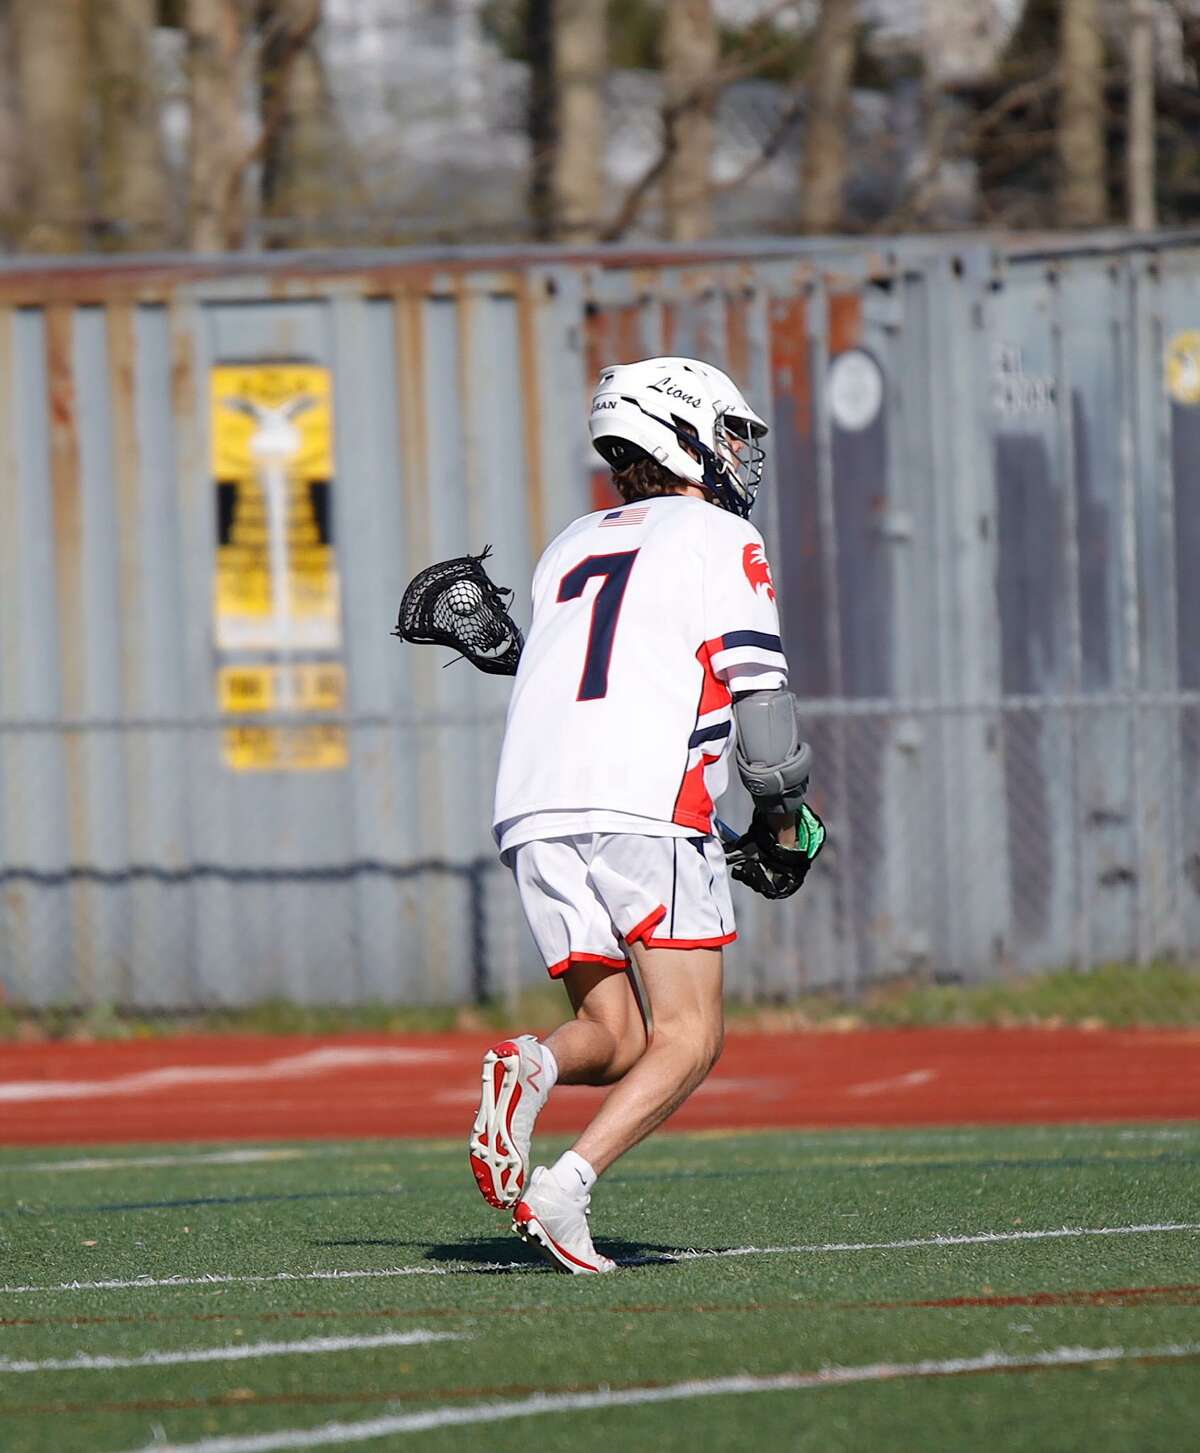 Foran’s Joey Honcz is a senior captain on the lacrosse team and the leading returning scorer from last year. He was diagnosed with non-Hodgkin’s lymphoma in fifth grade.